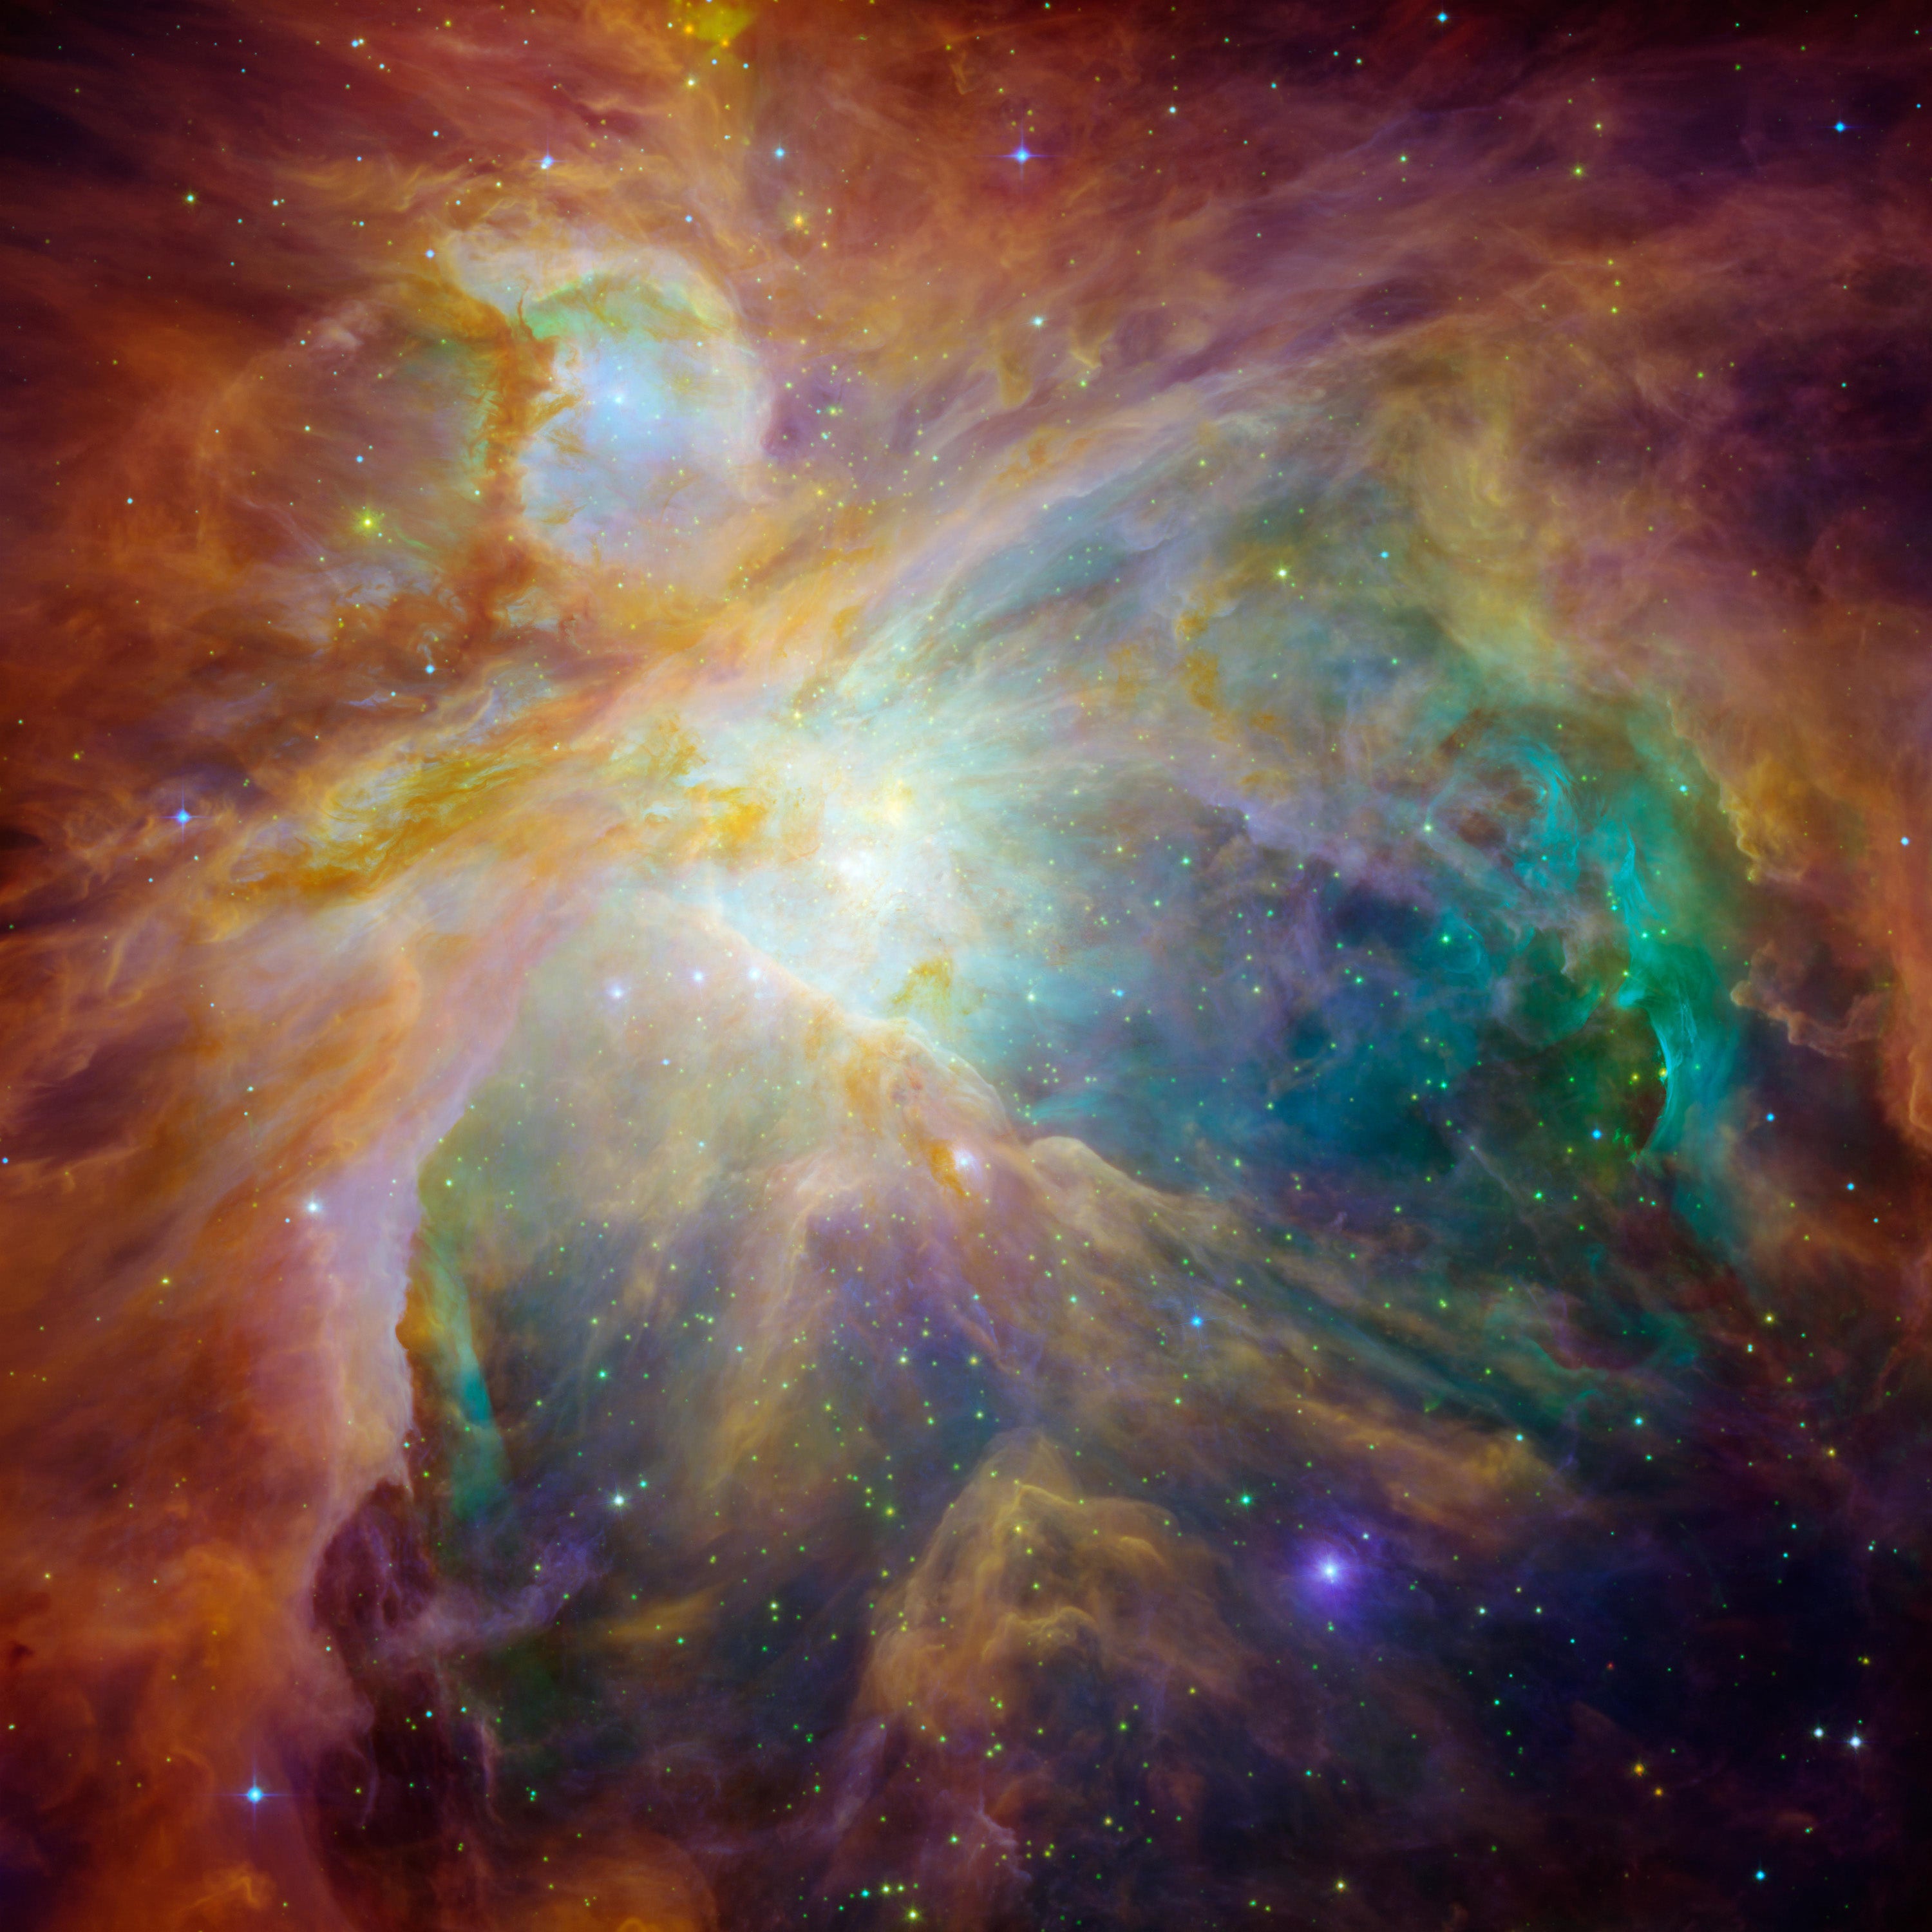 Infant stars forming in the Orion Nebula.